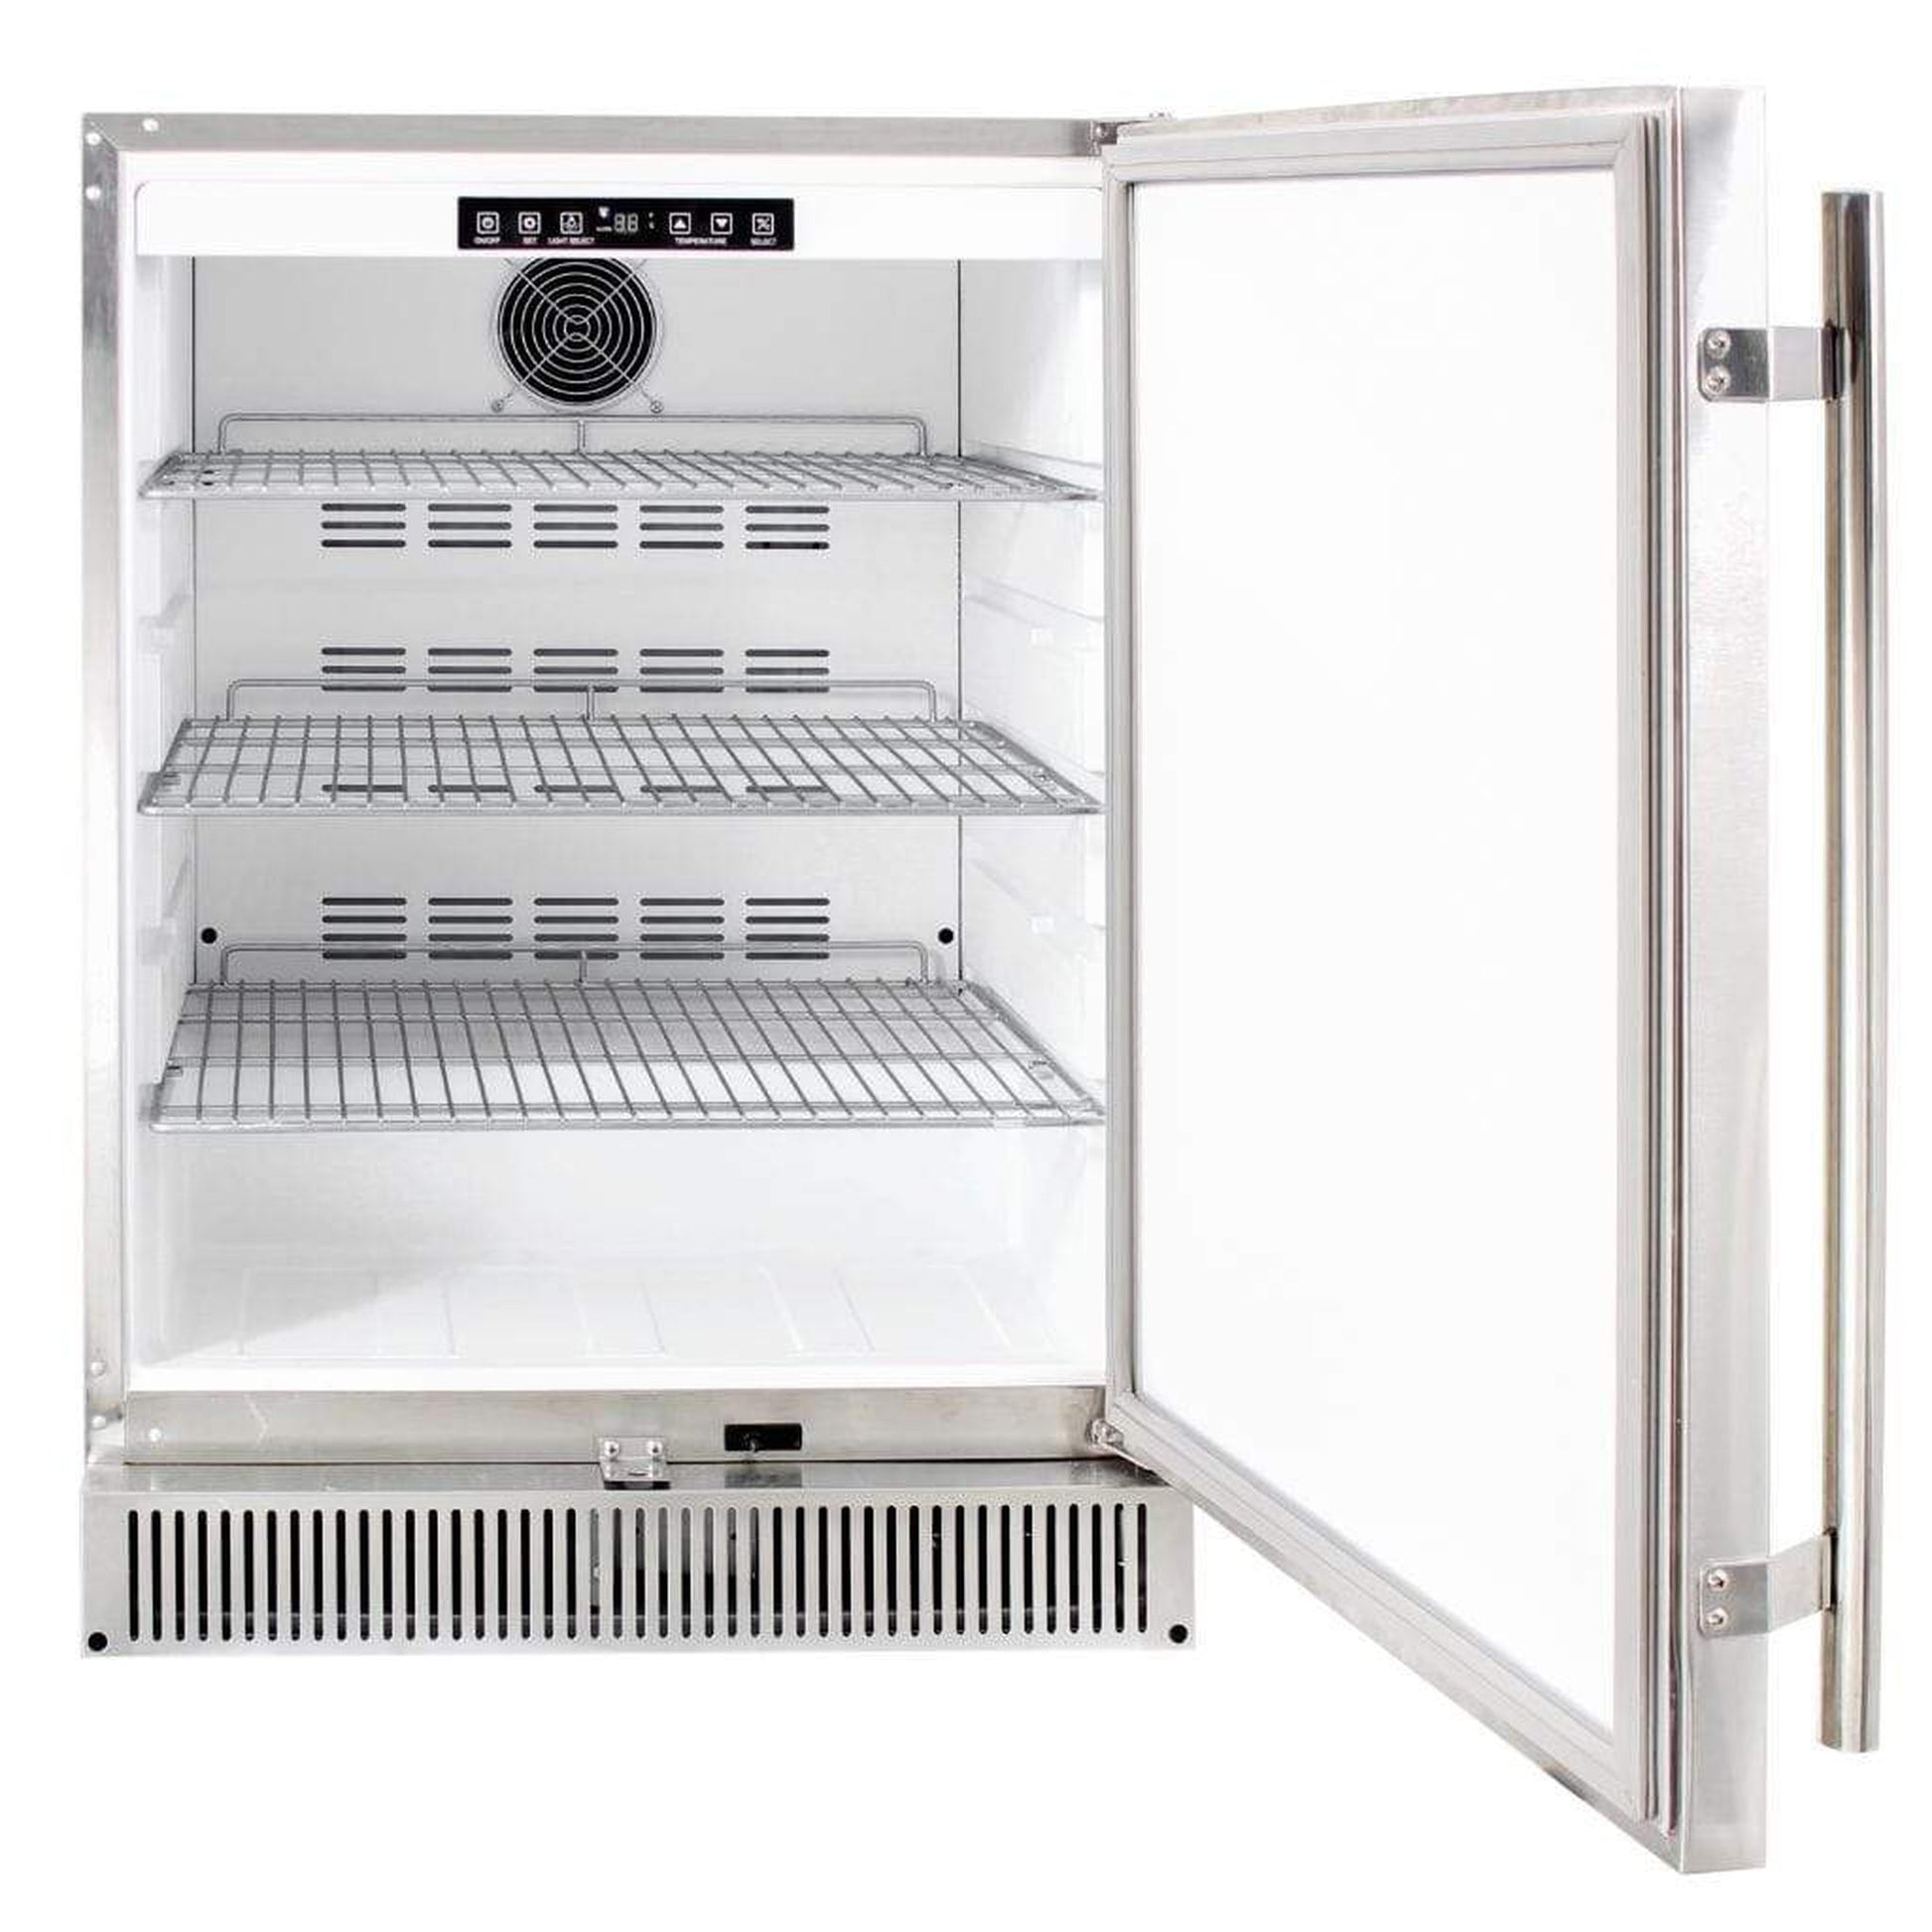 Blaze 24" Outdoor Rated Stainless Refrigerator 5.2 Cu Ft.